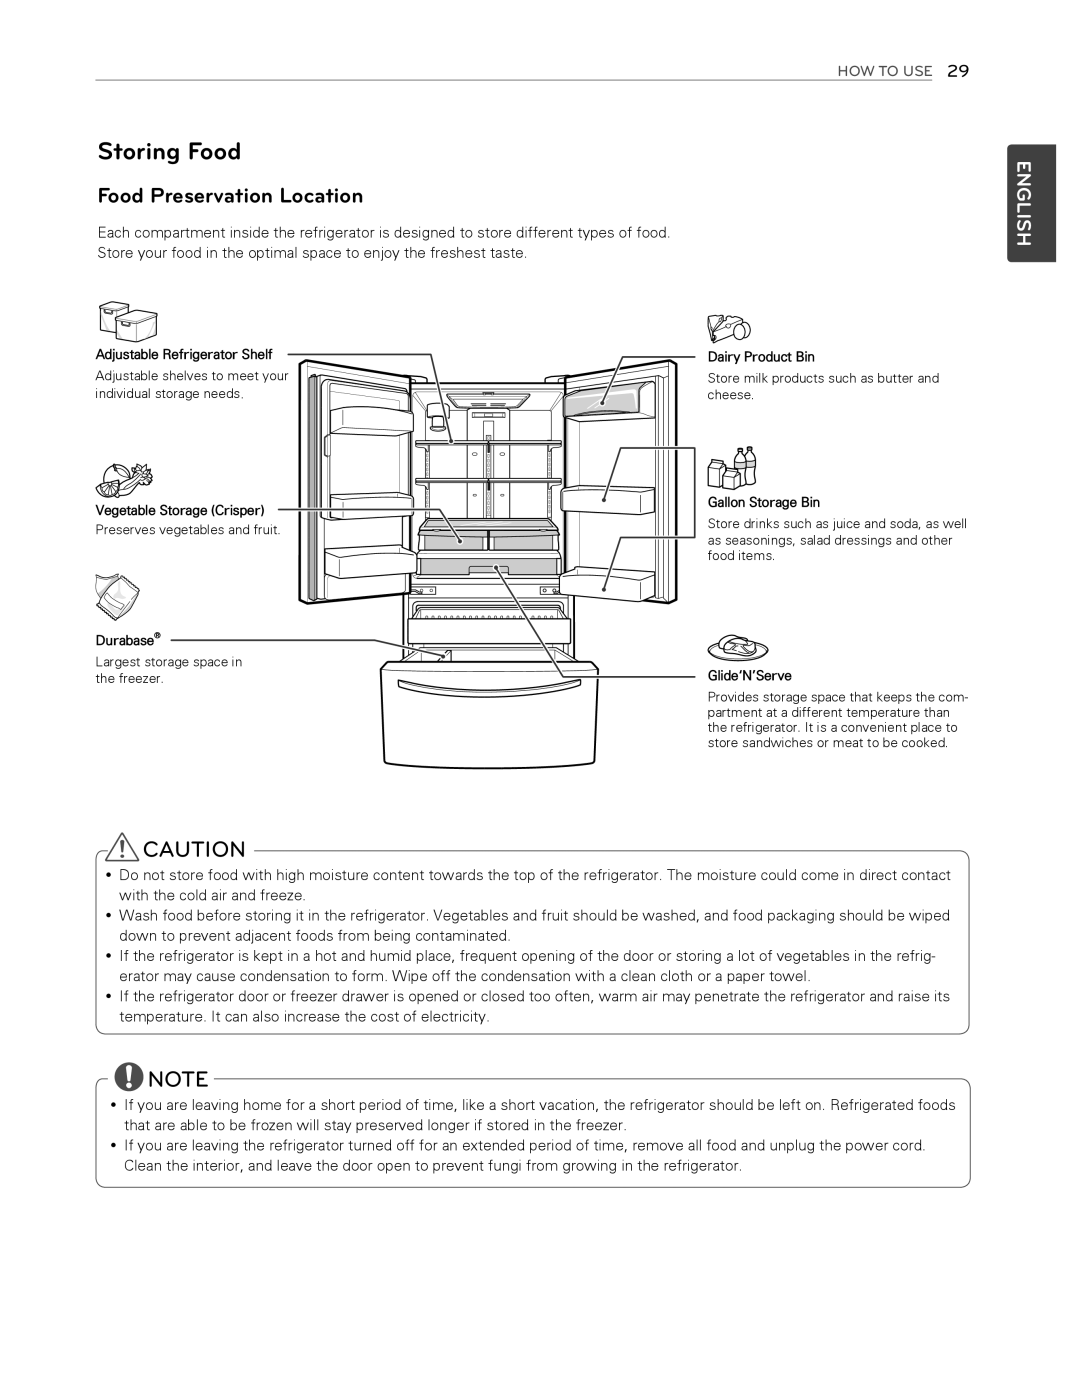 LG Electronics LFX25974ST, LFX25974SB owner manual Storing Food, Food Preservation Location, English, How To Use 